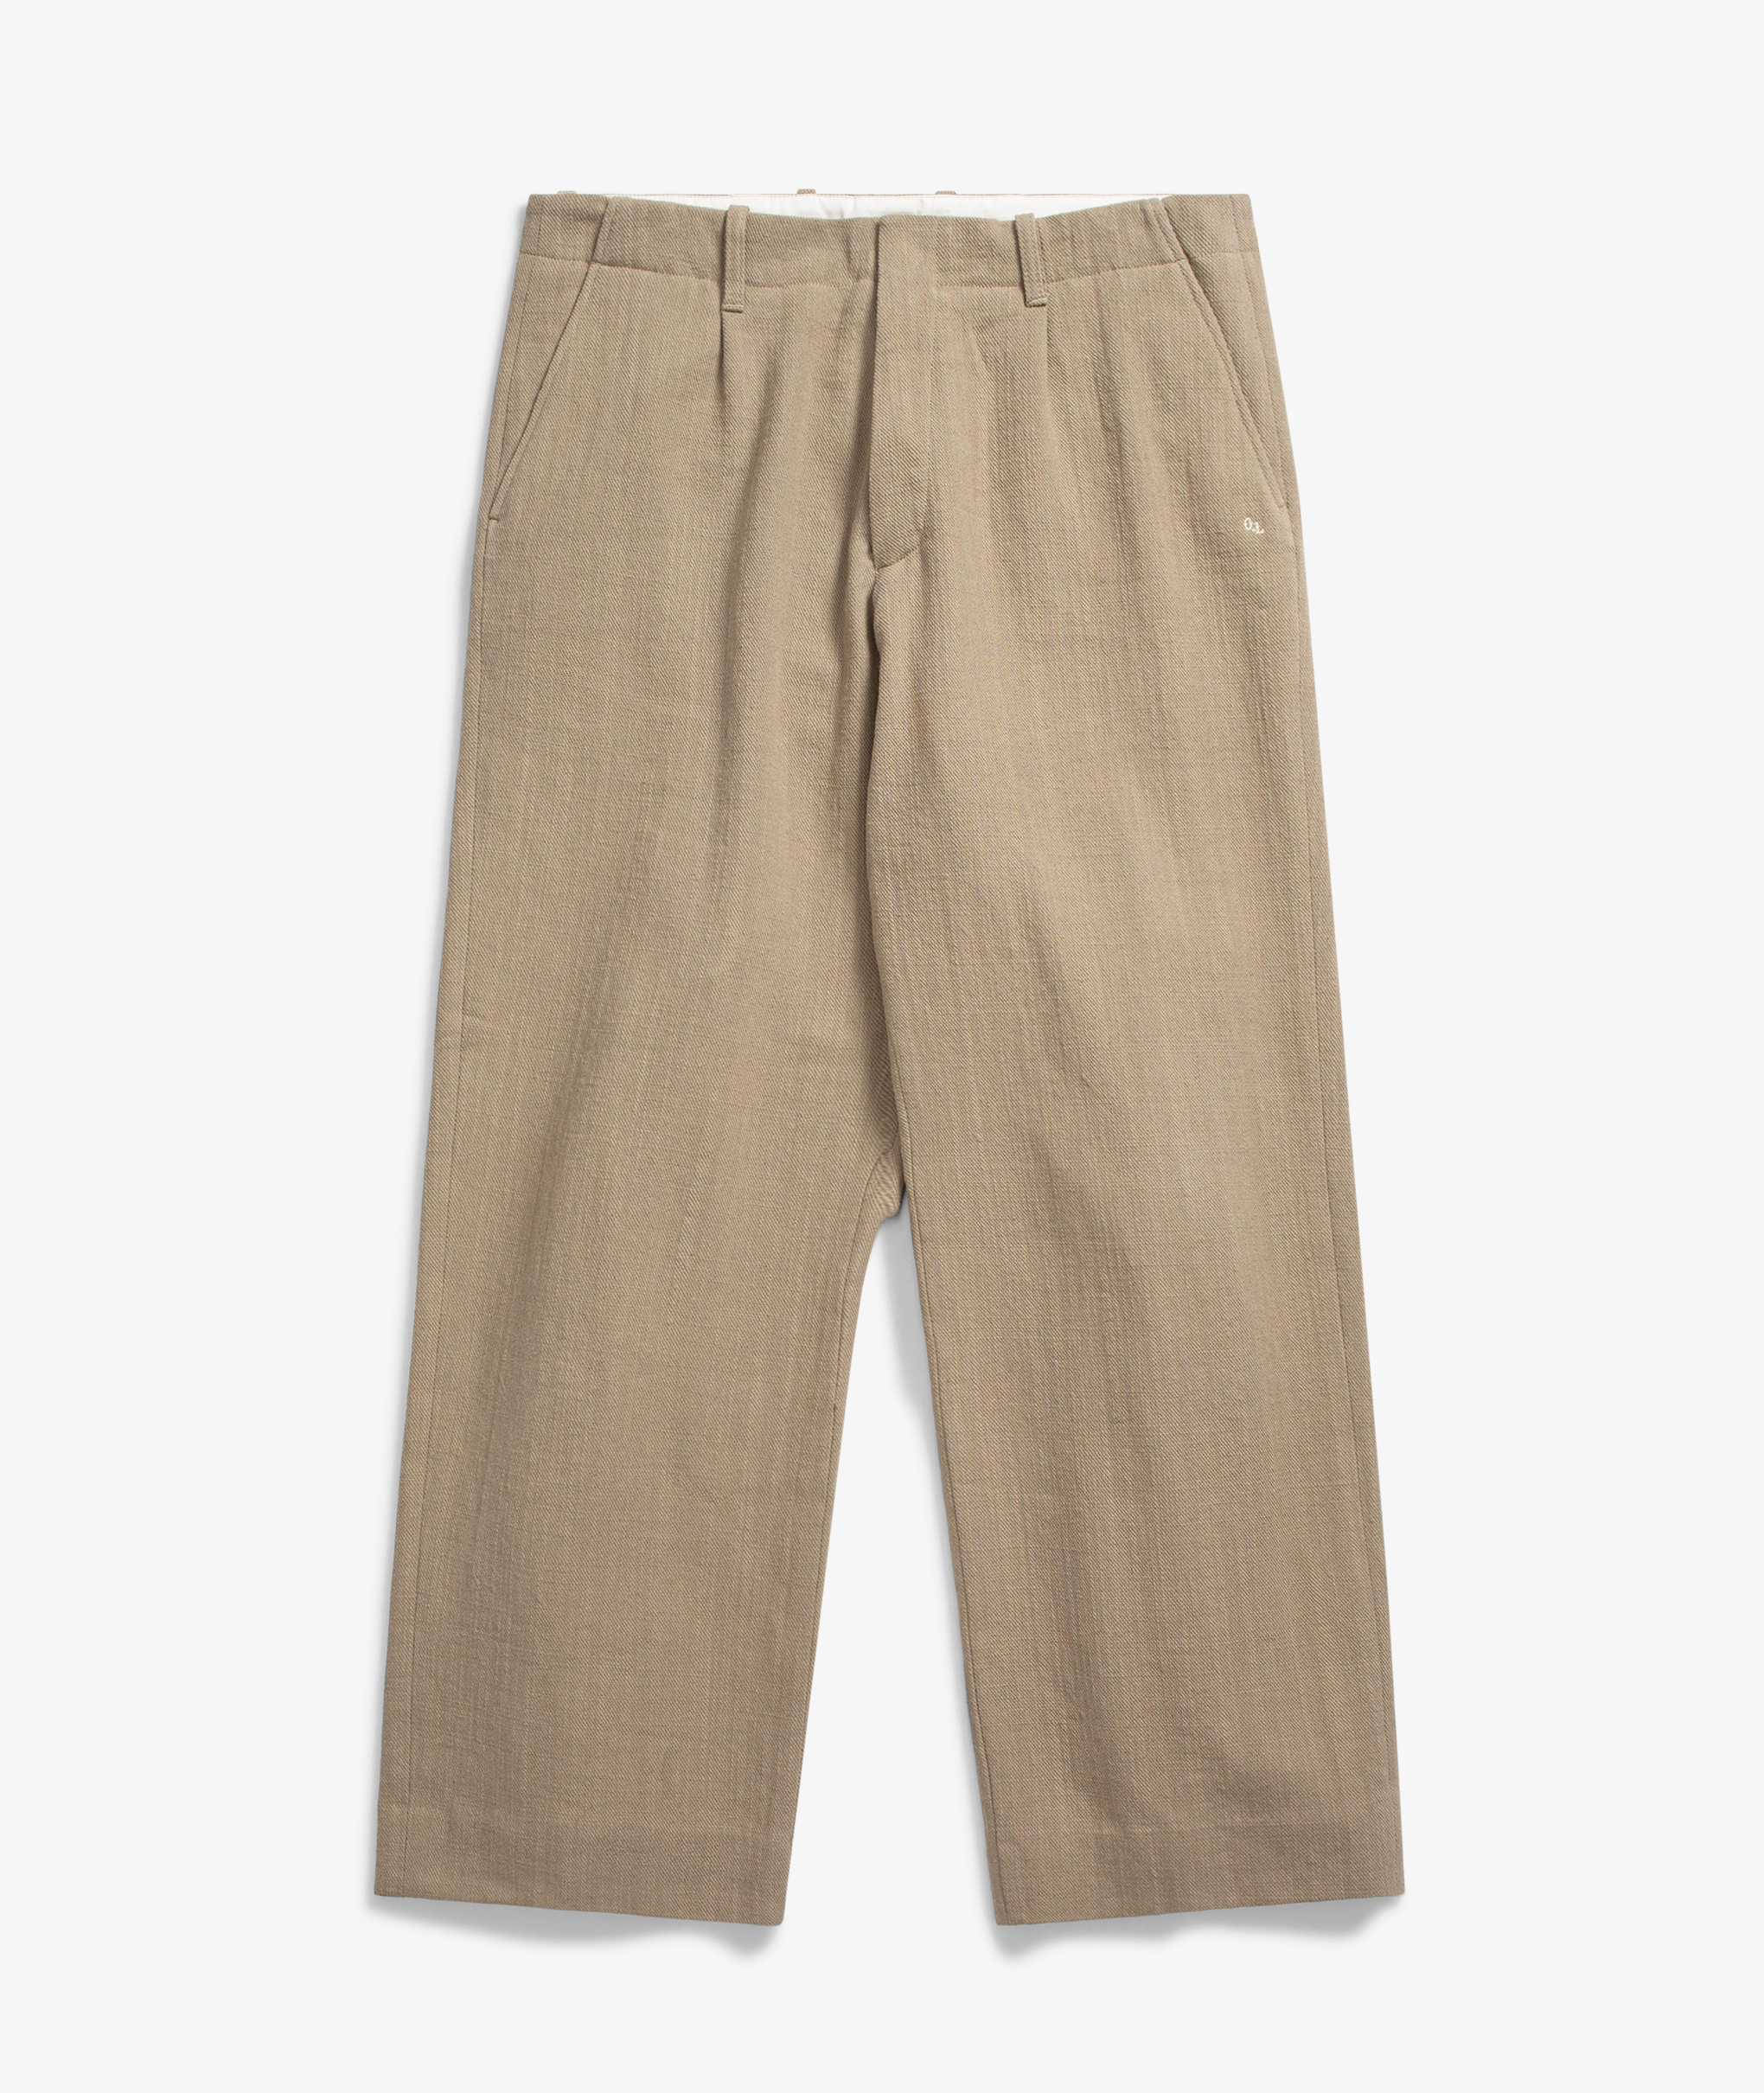 Norse Store  Shipping Worldwide - Our Legacy Borrowed Chino - Khaki True  Cotton Twill